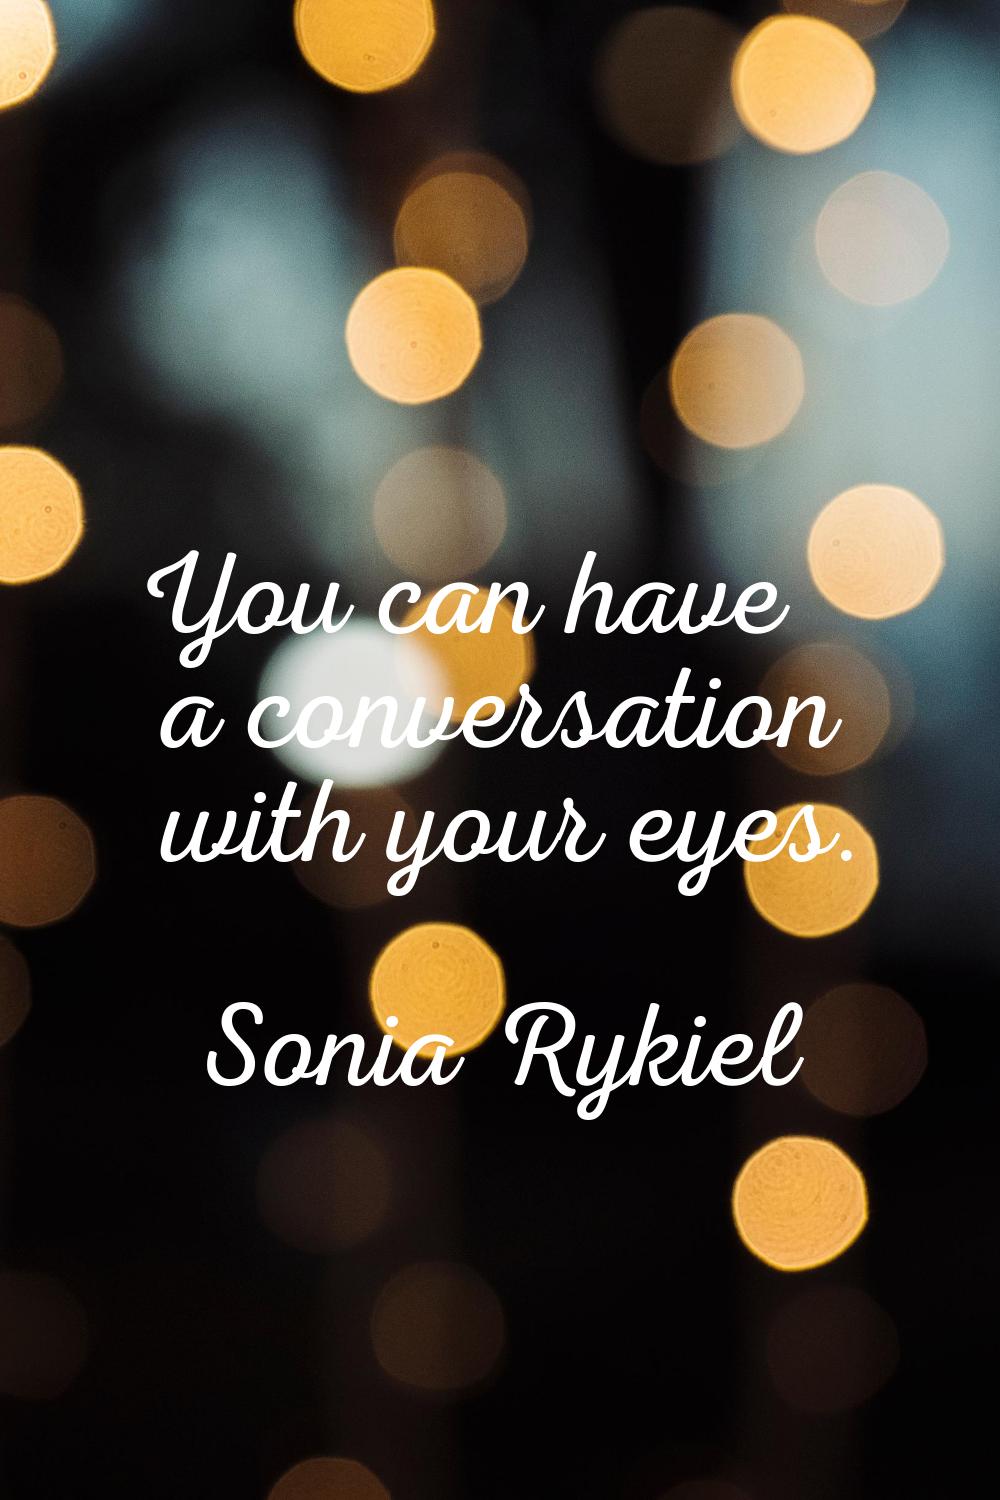 You can have a conversation with your eyes.